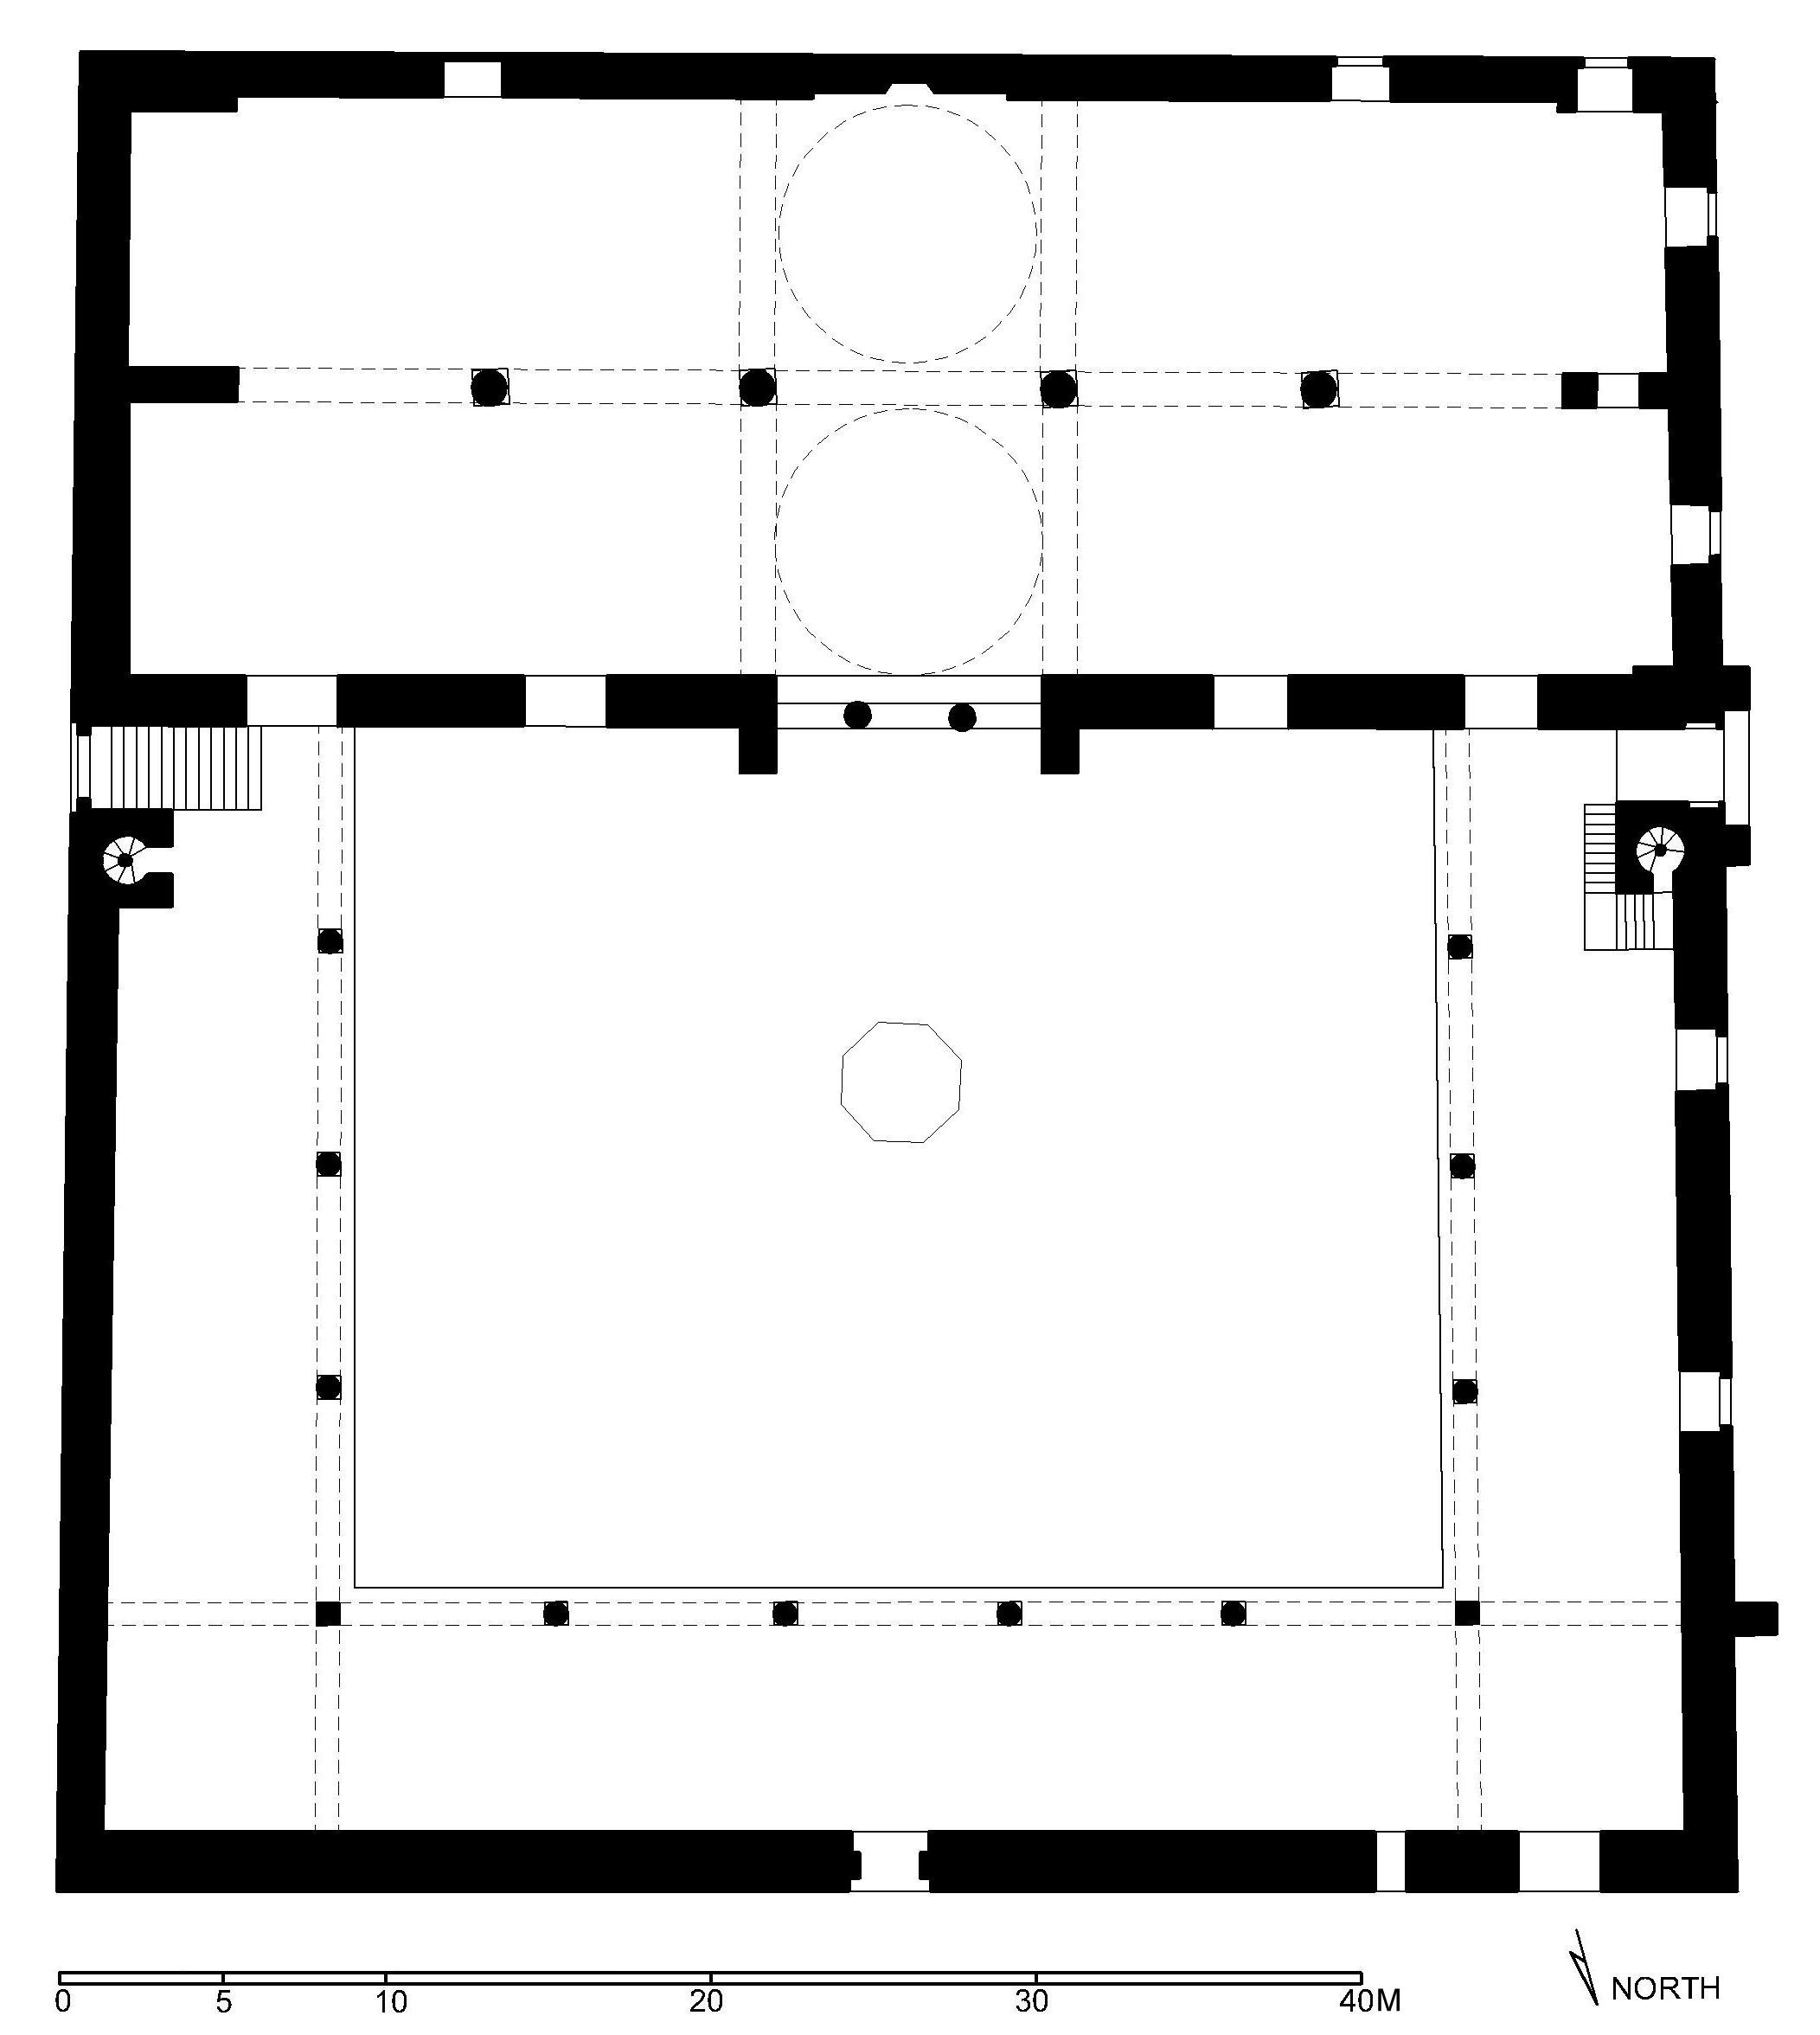 Isa Bey Camii - Floor plan of mosque (after Meinecke) in AutoCAD 2000 format. Click the download button to download a zipped file containing the .dwg file. 